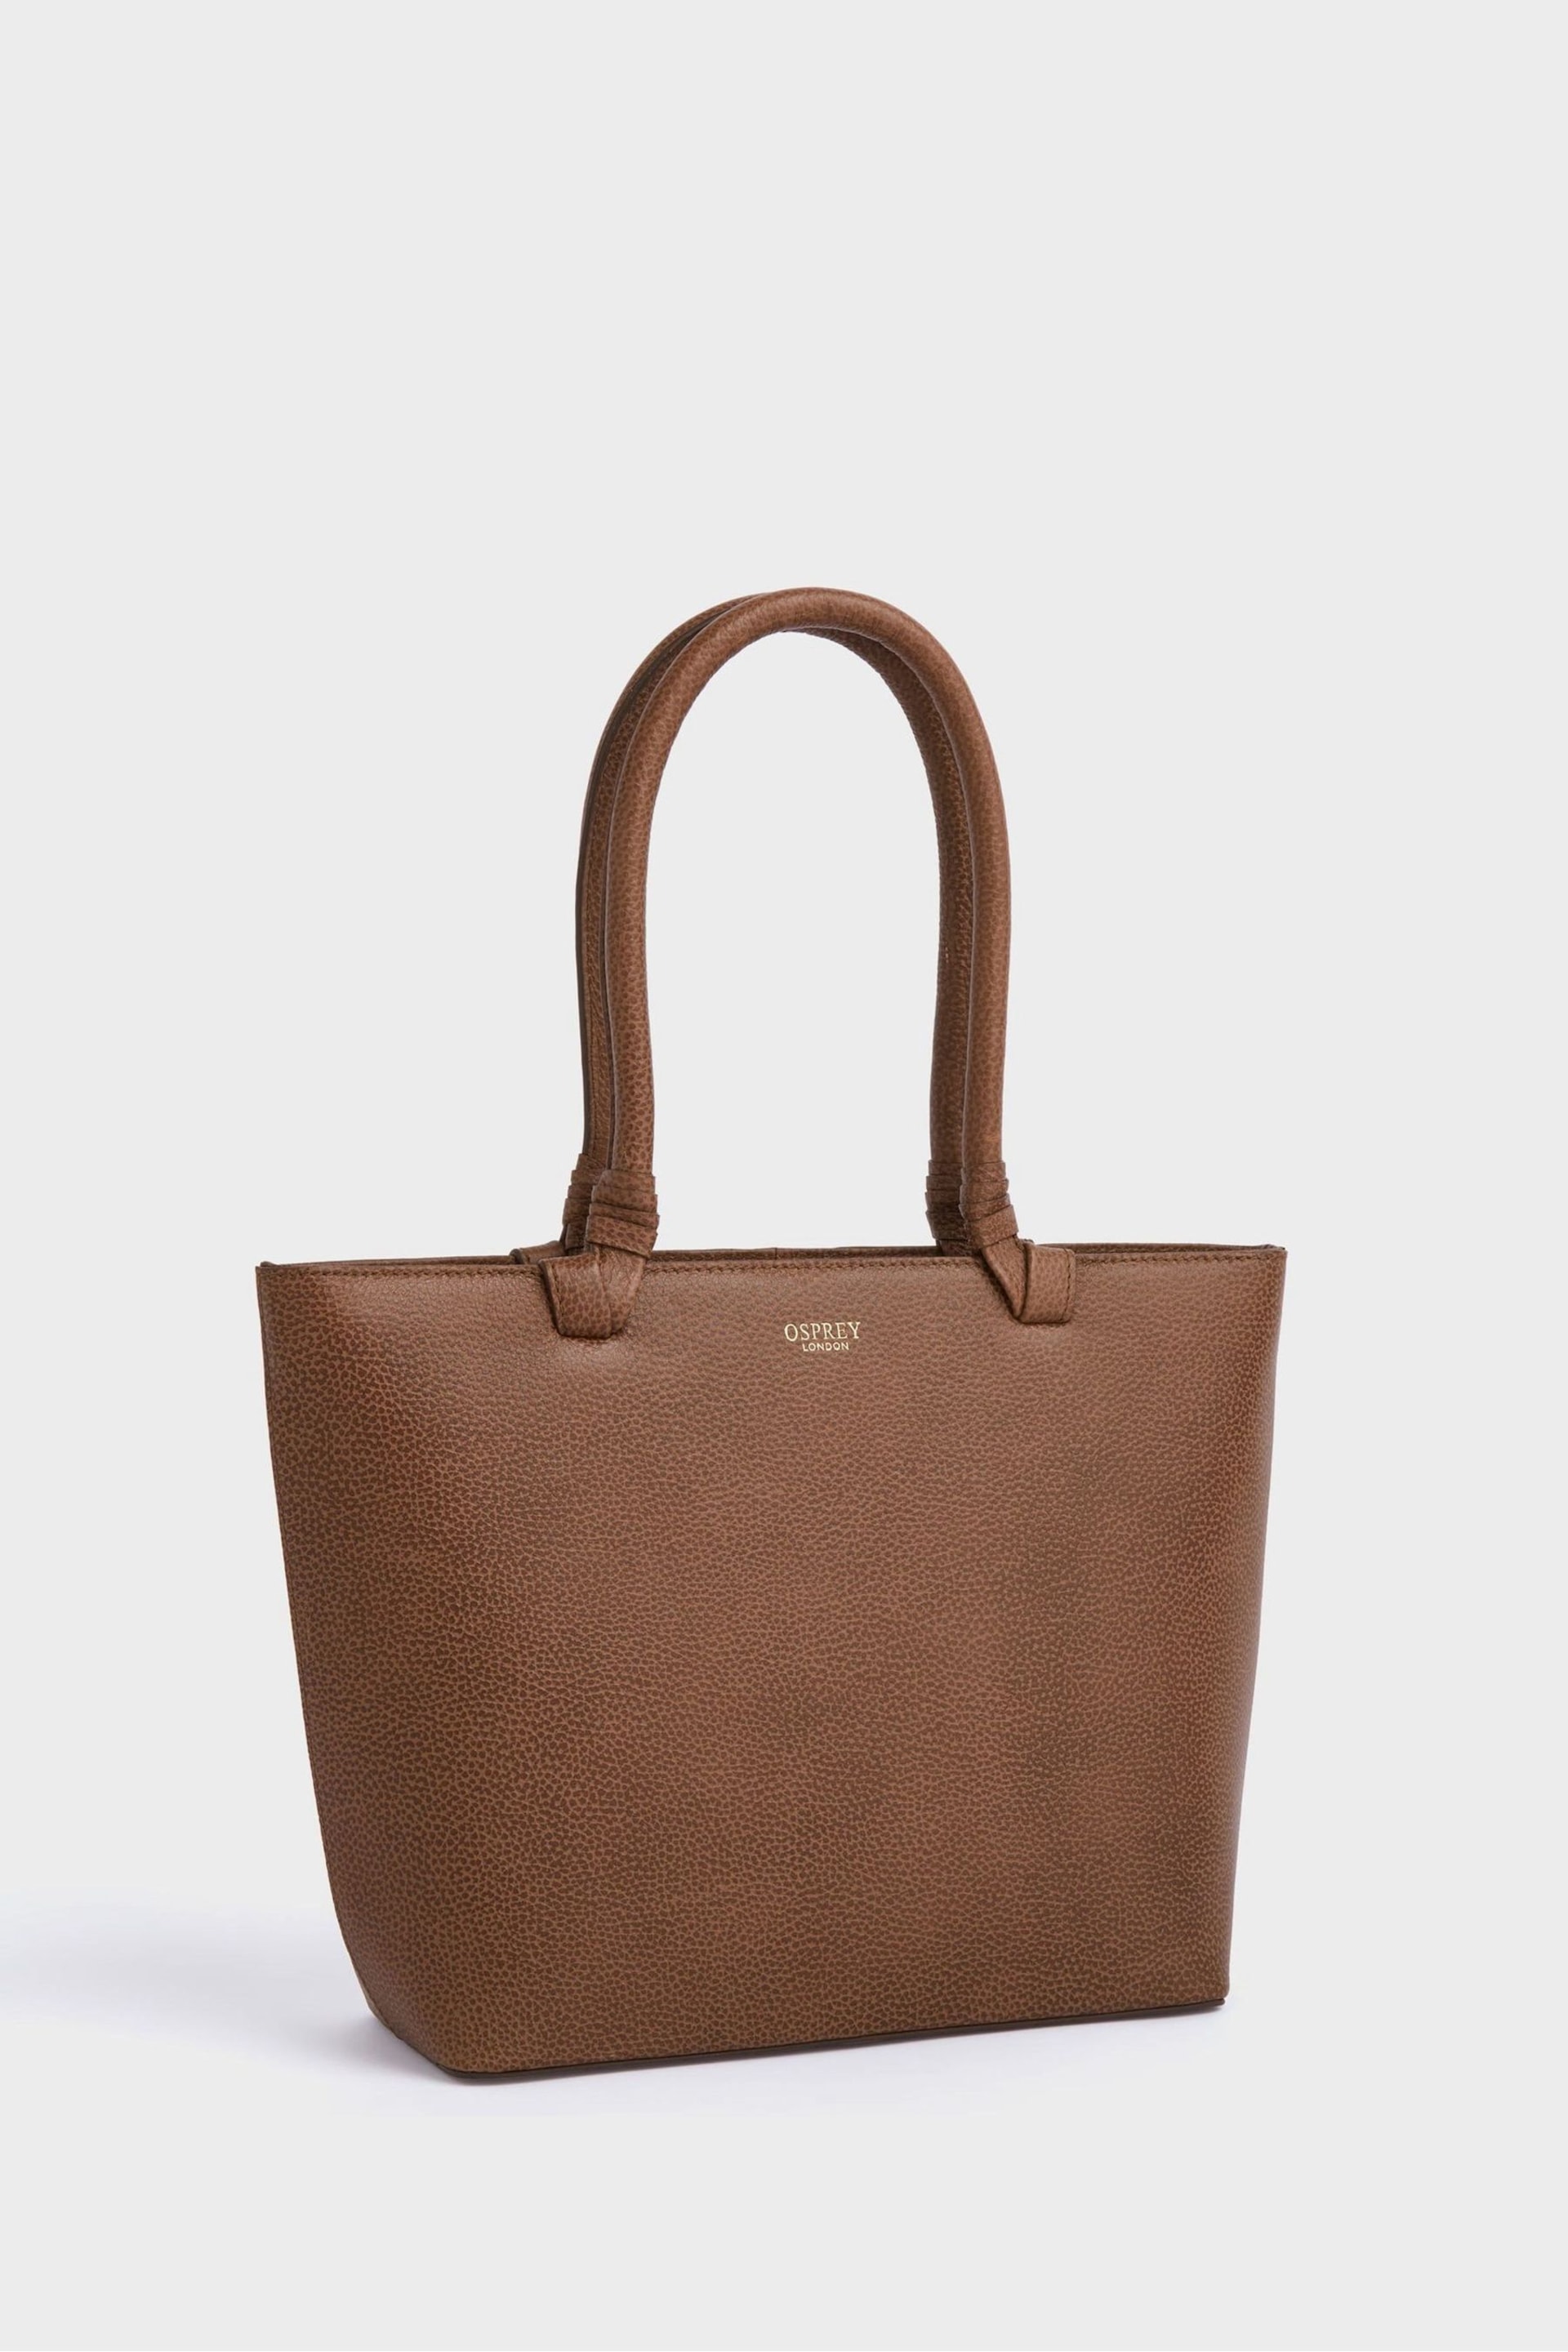 OSPREY LONDON Tan The Collier Leather Shoulder Tote Bag - Image 2 of 5